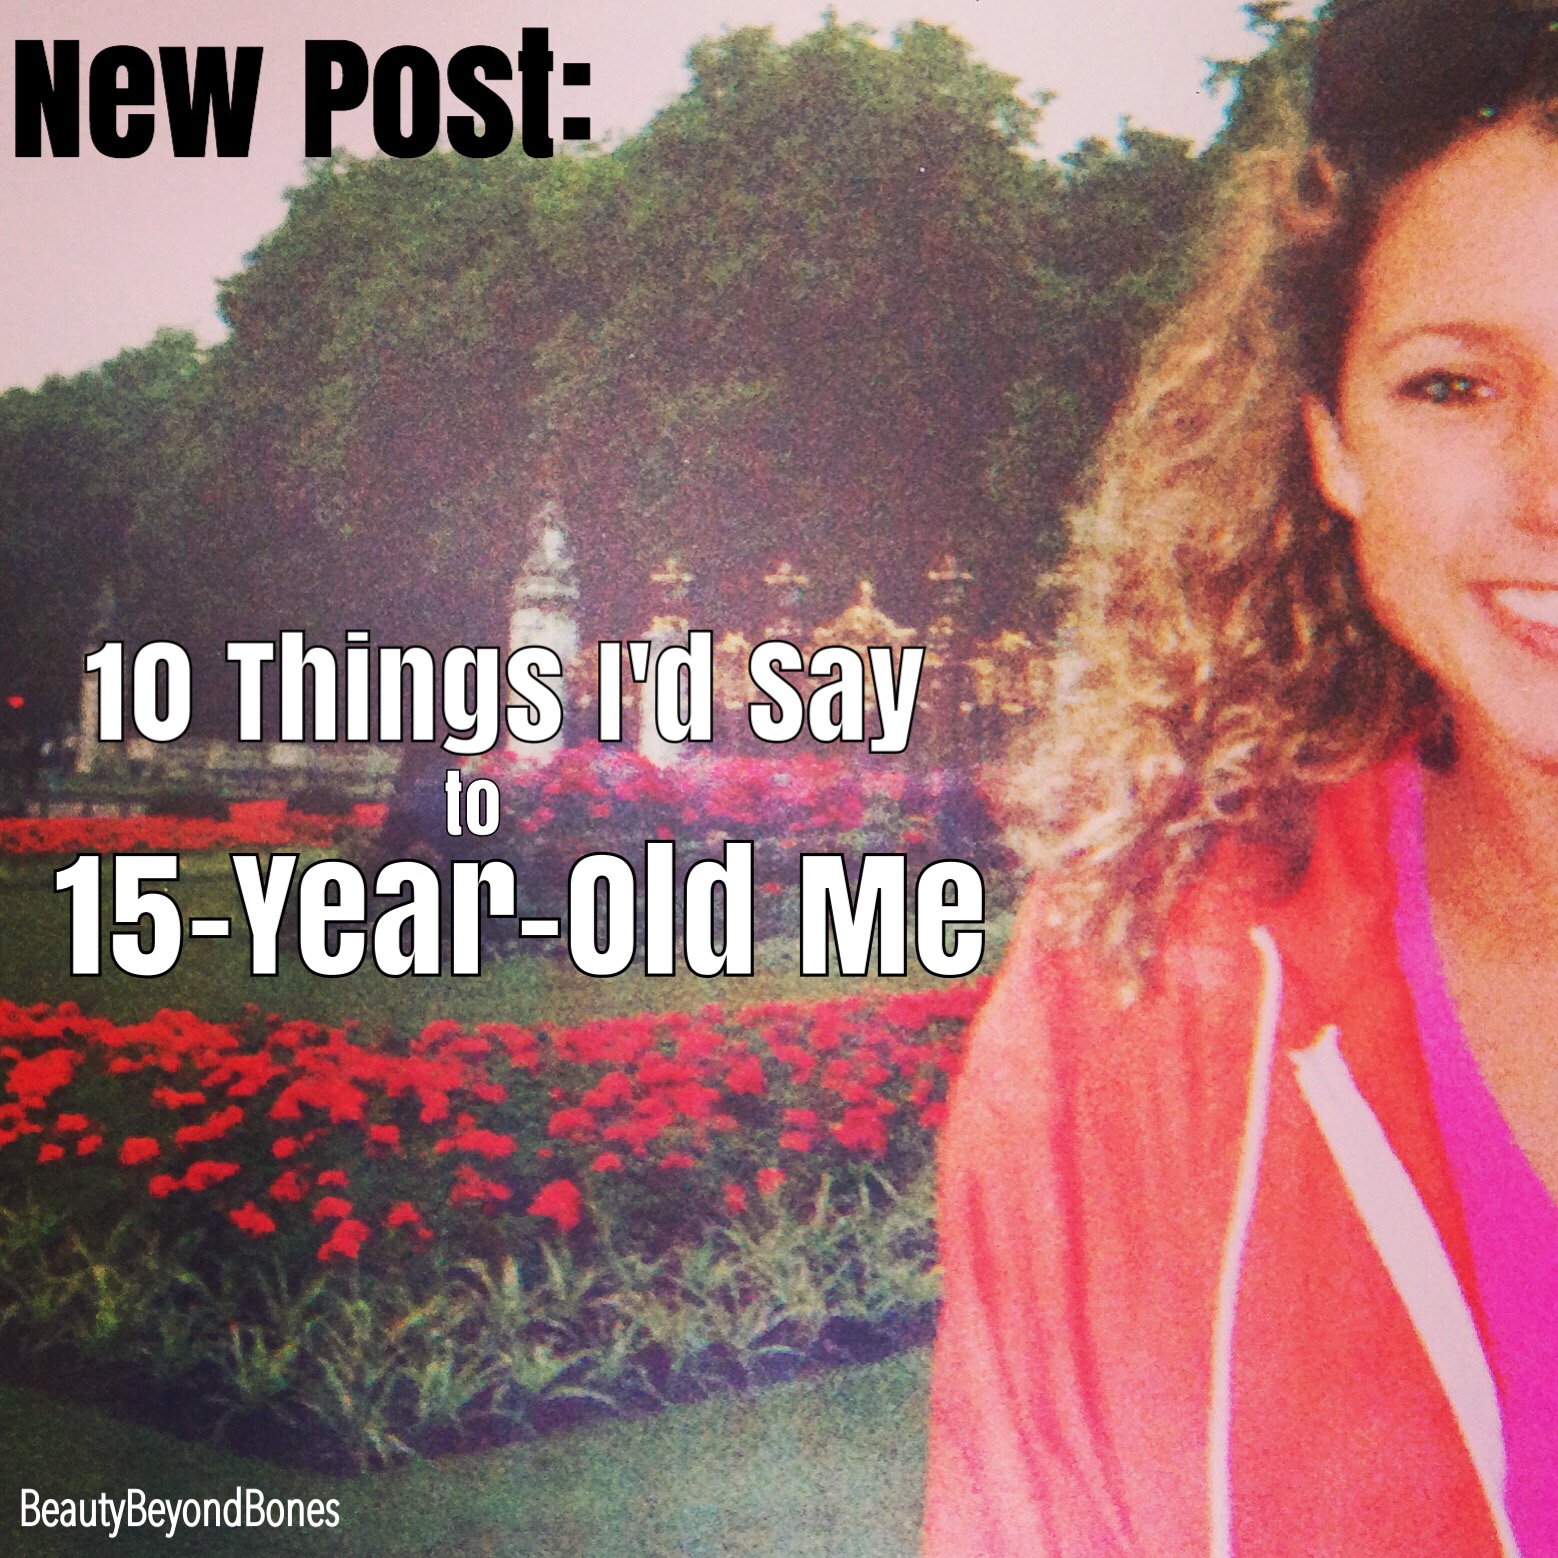 10 Things I’d Say to 15-Year-Old Me!